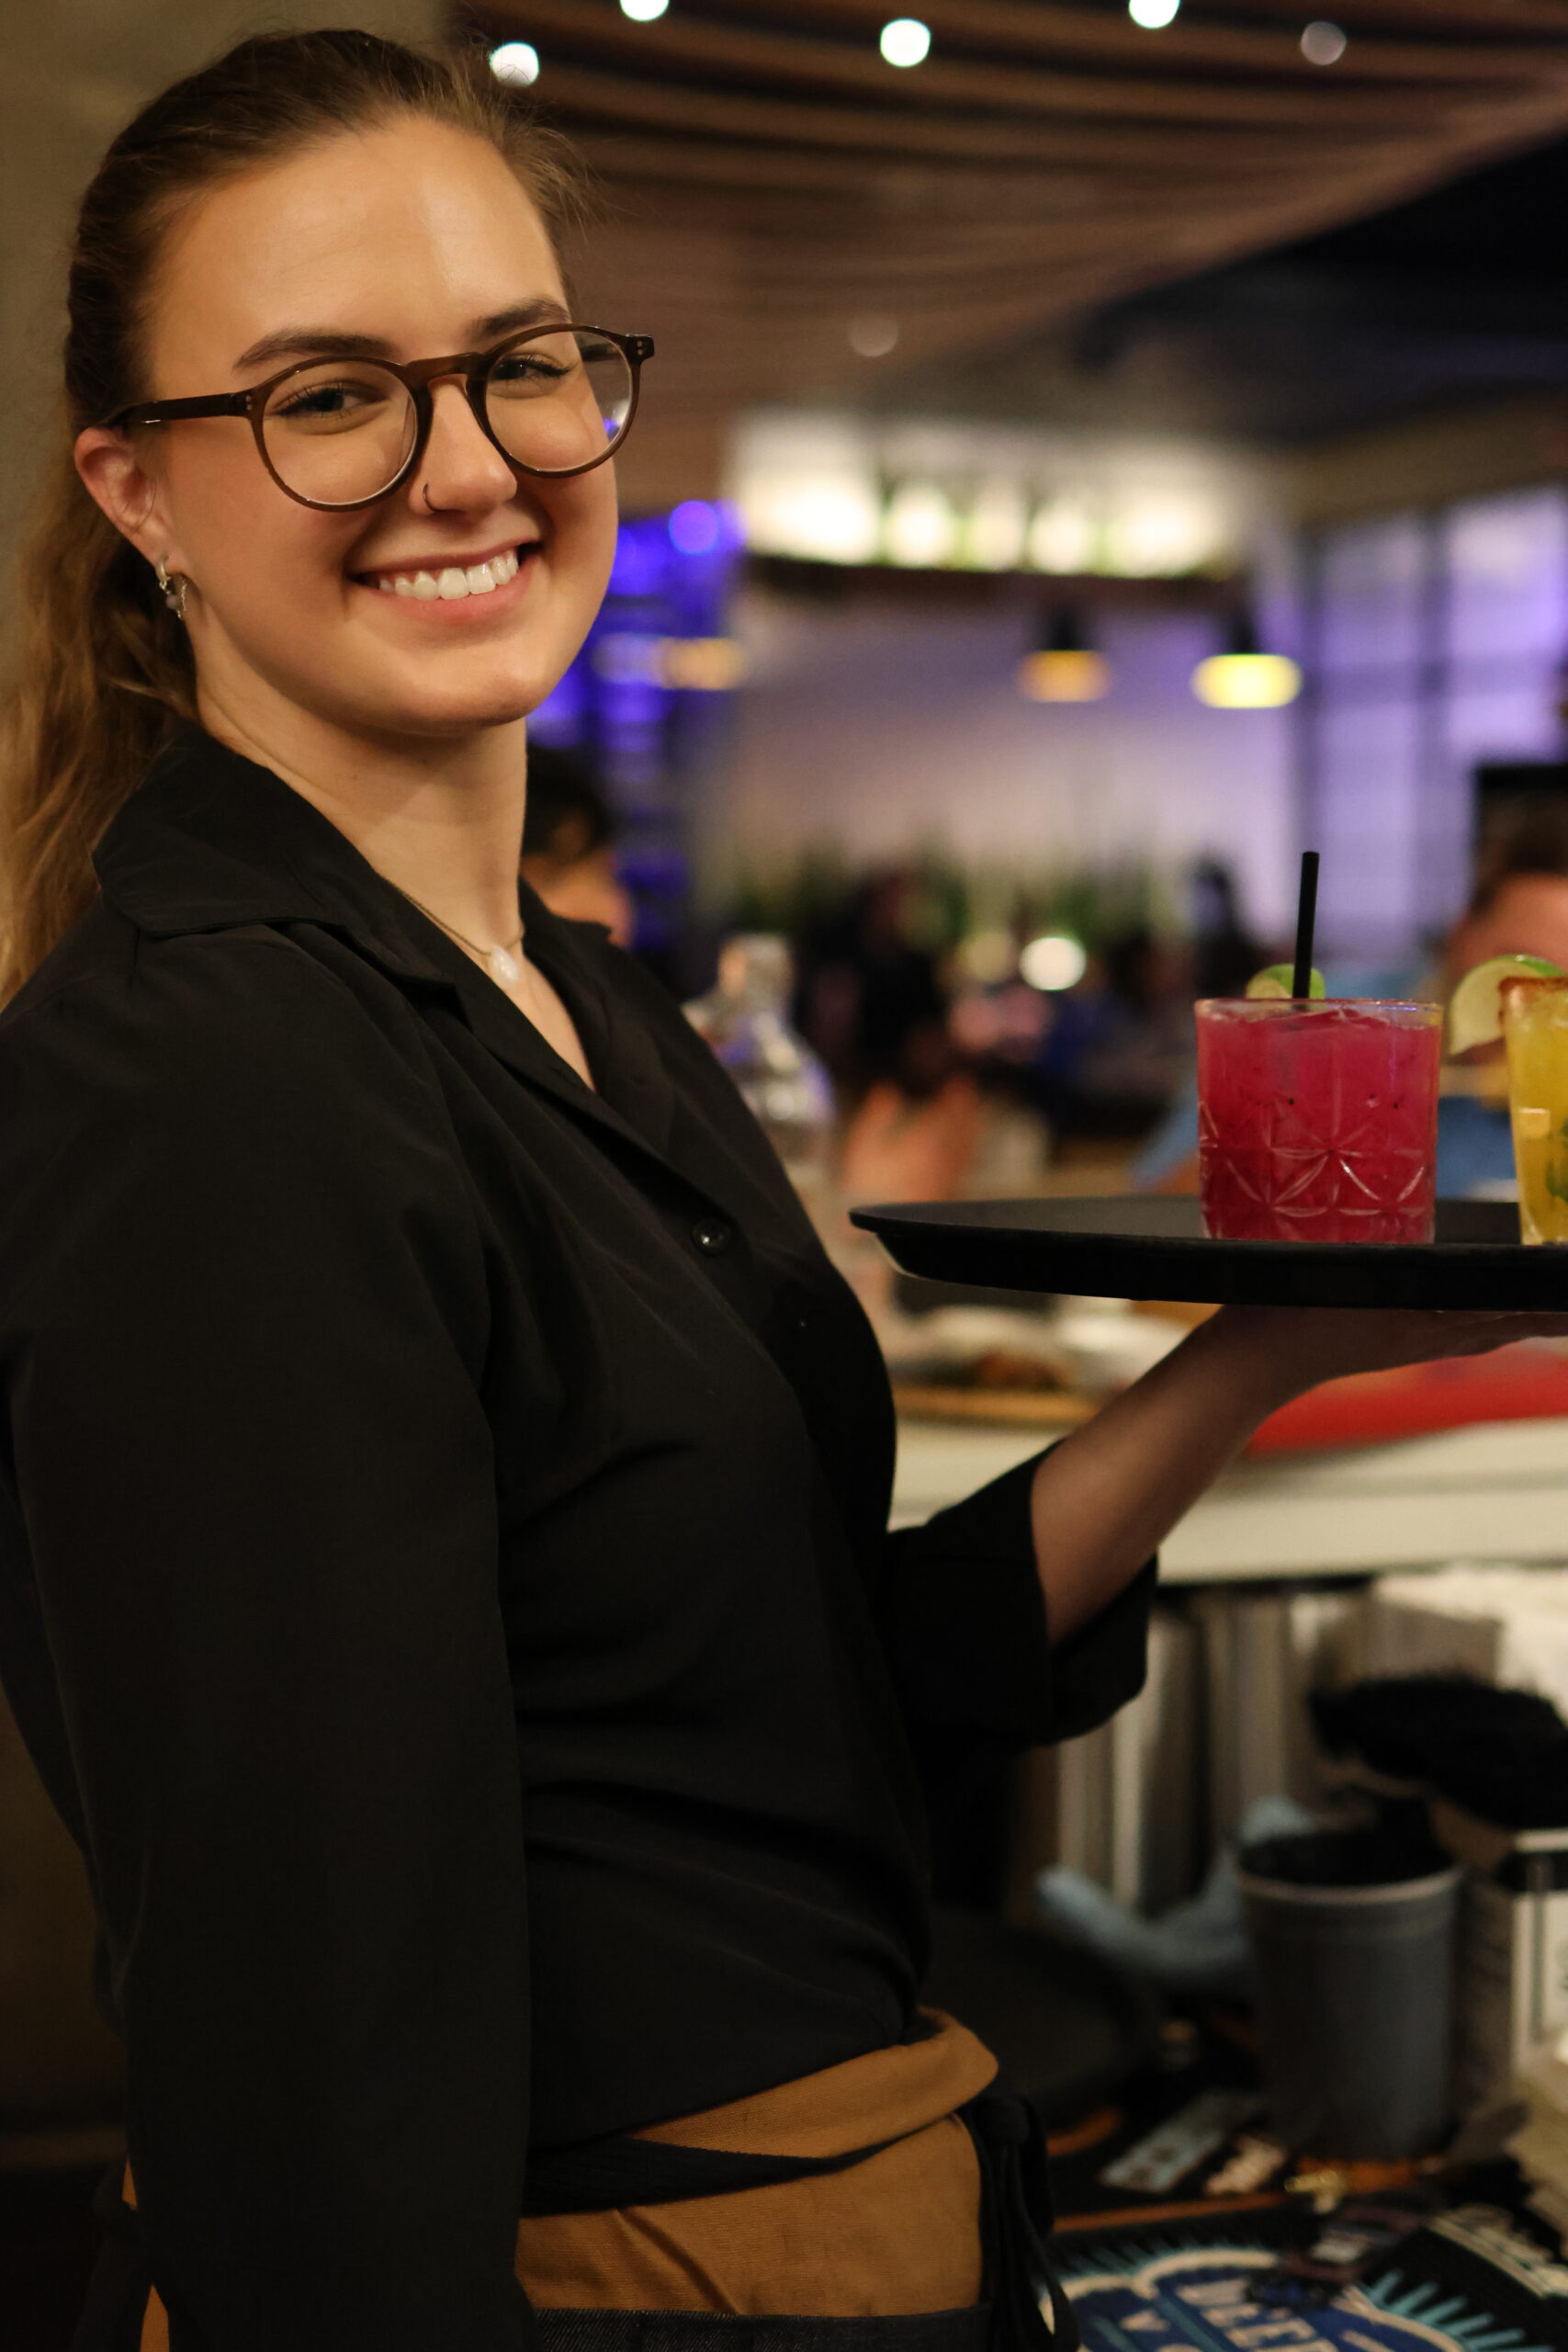 Waitress serving cocktail in busy restaurant.